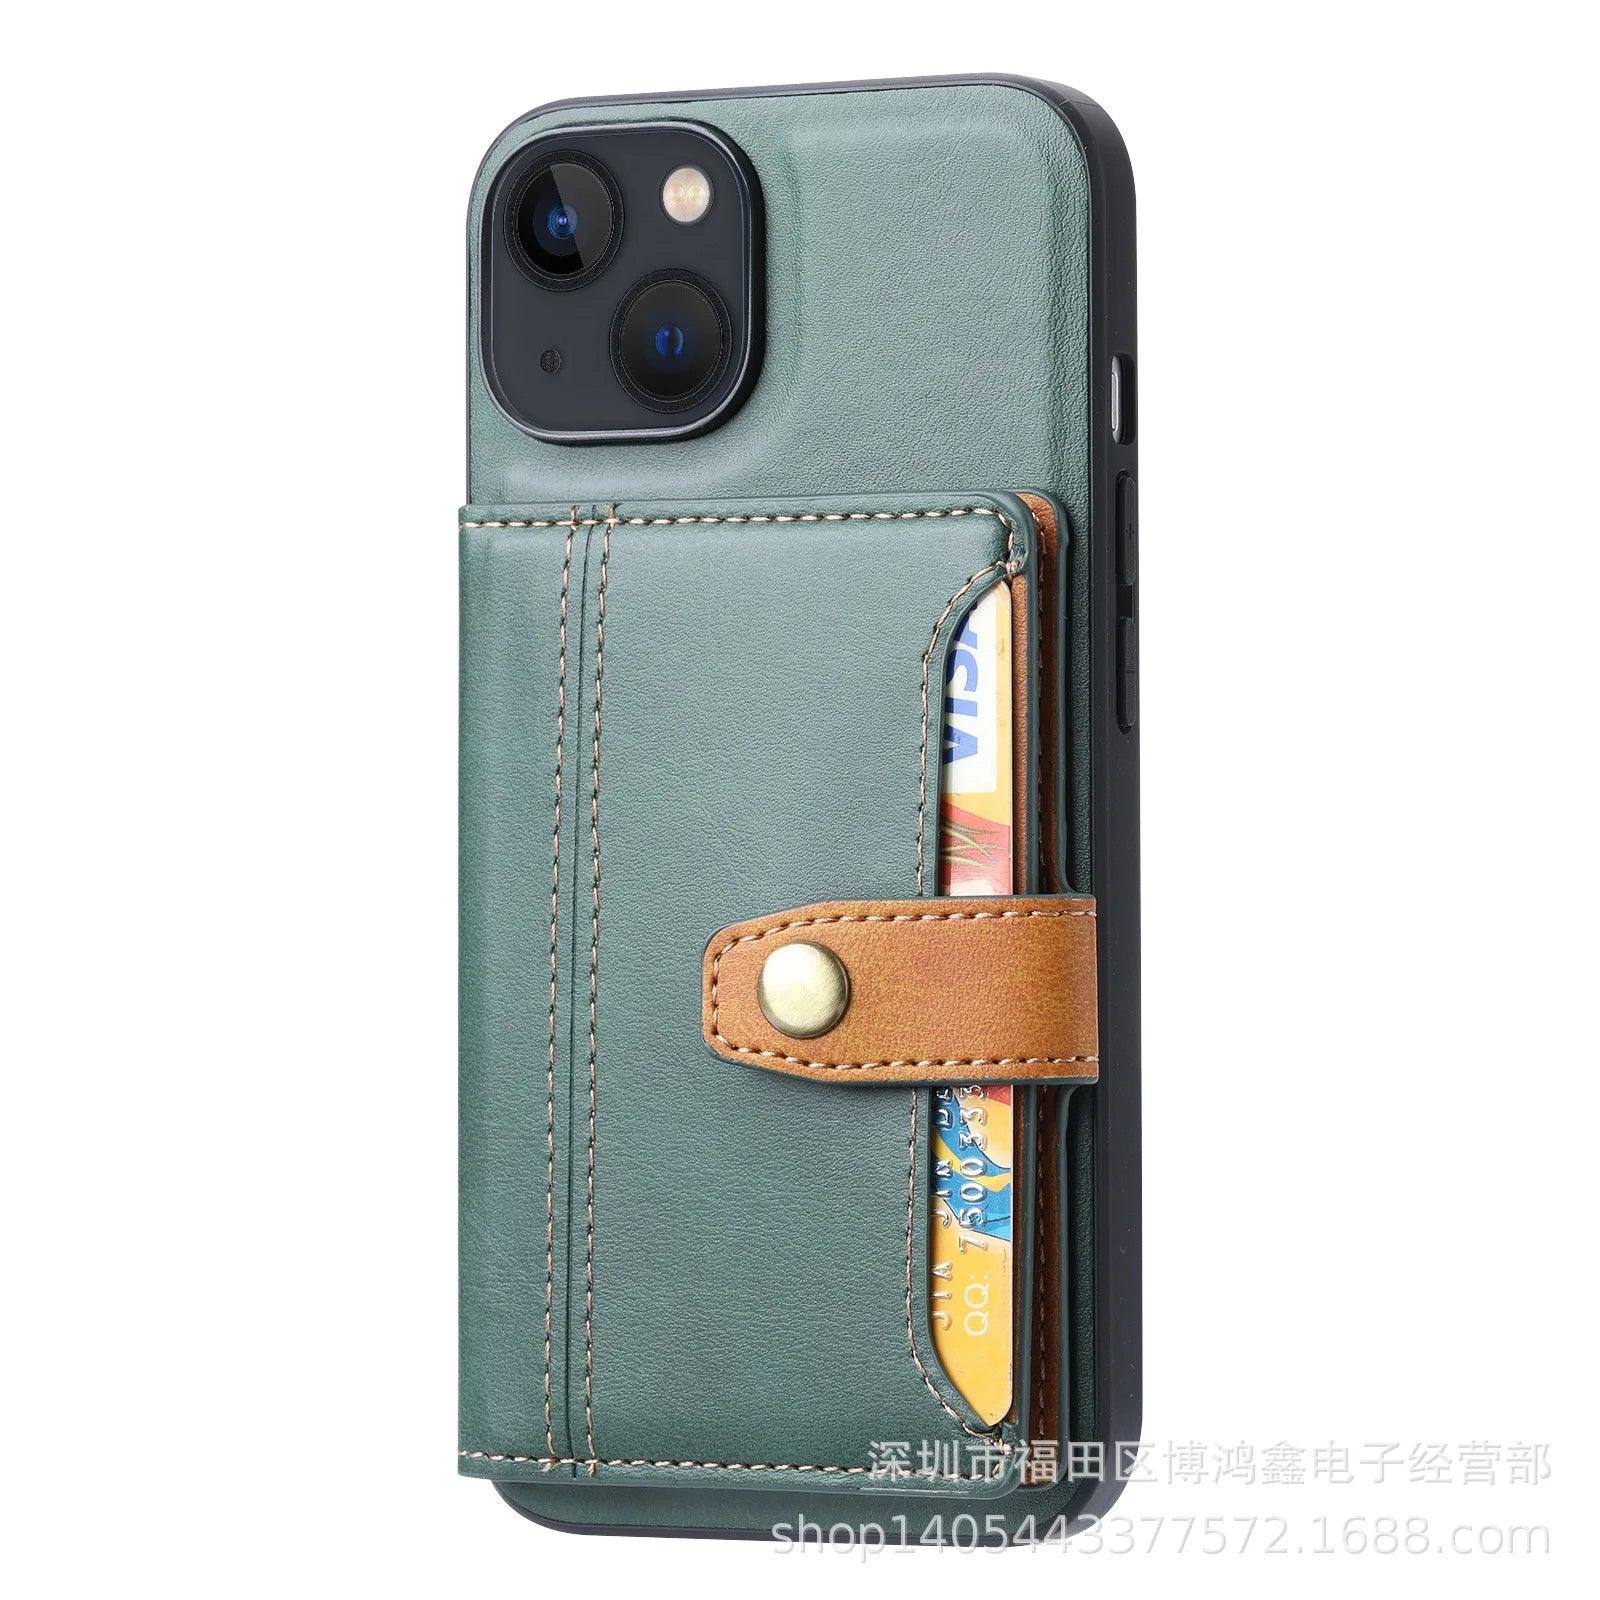 TSP78 Cute Phone Cases For iPhone 8 Plus, 6, 7, X, 11 Pro Max, 14, 13, and 12 Pro Max - Leather Multi-functional Cover - Touchy Style